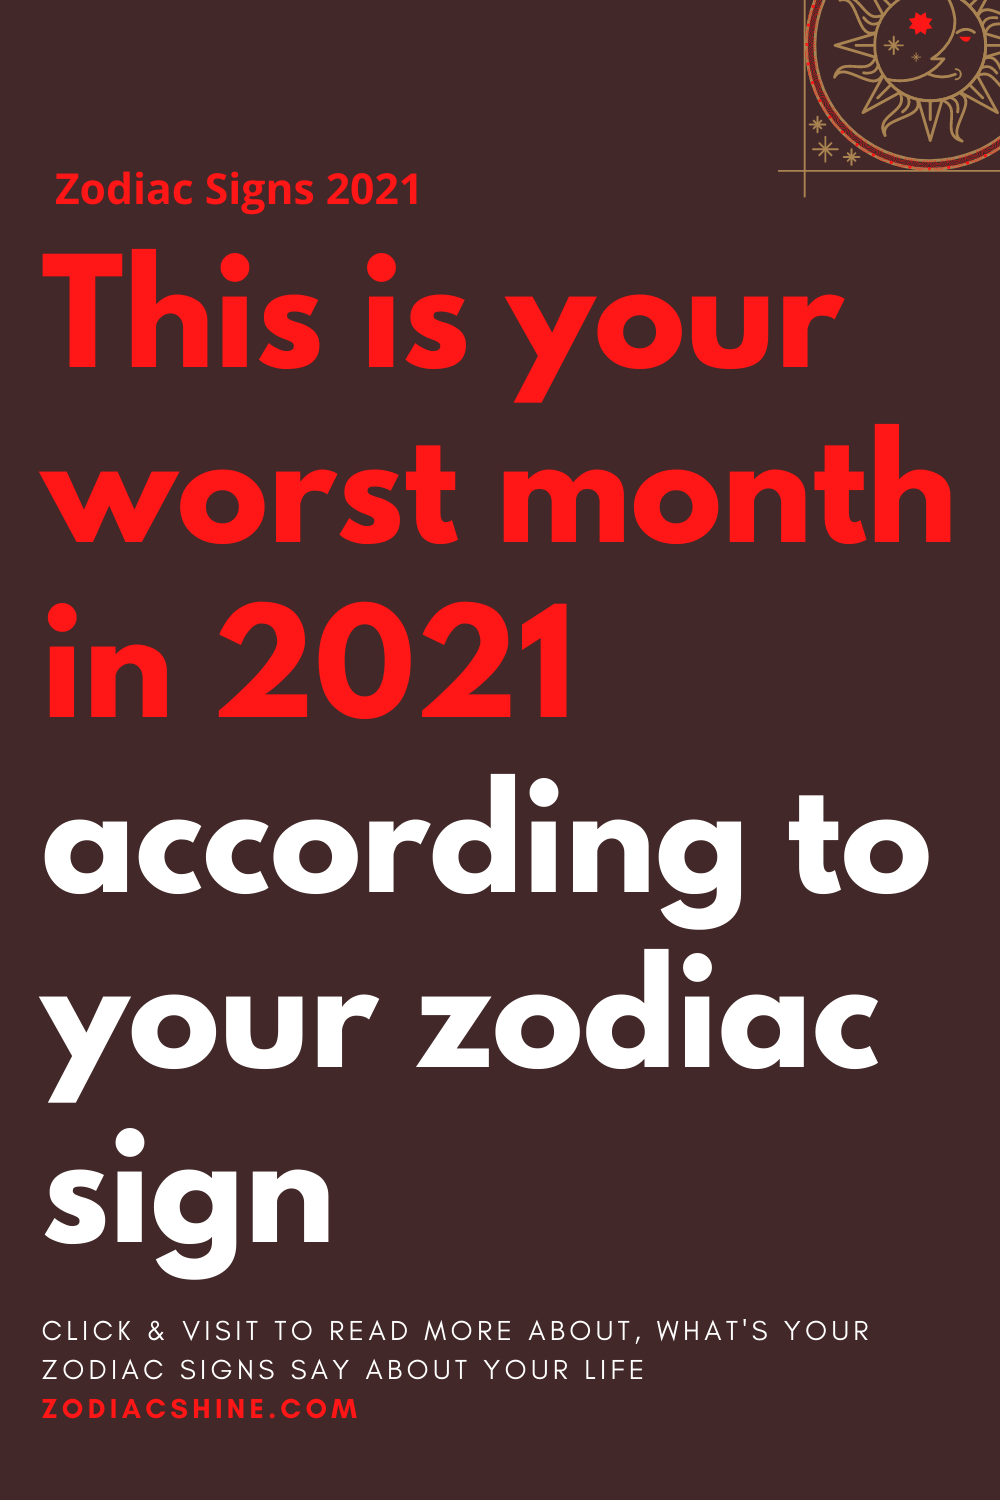 This is your worst month in 2021 according to your zodiac sign